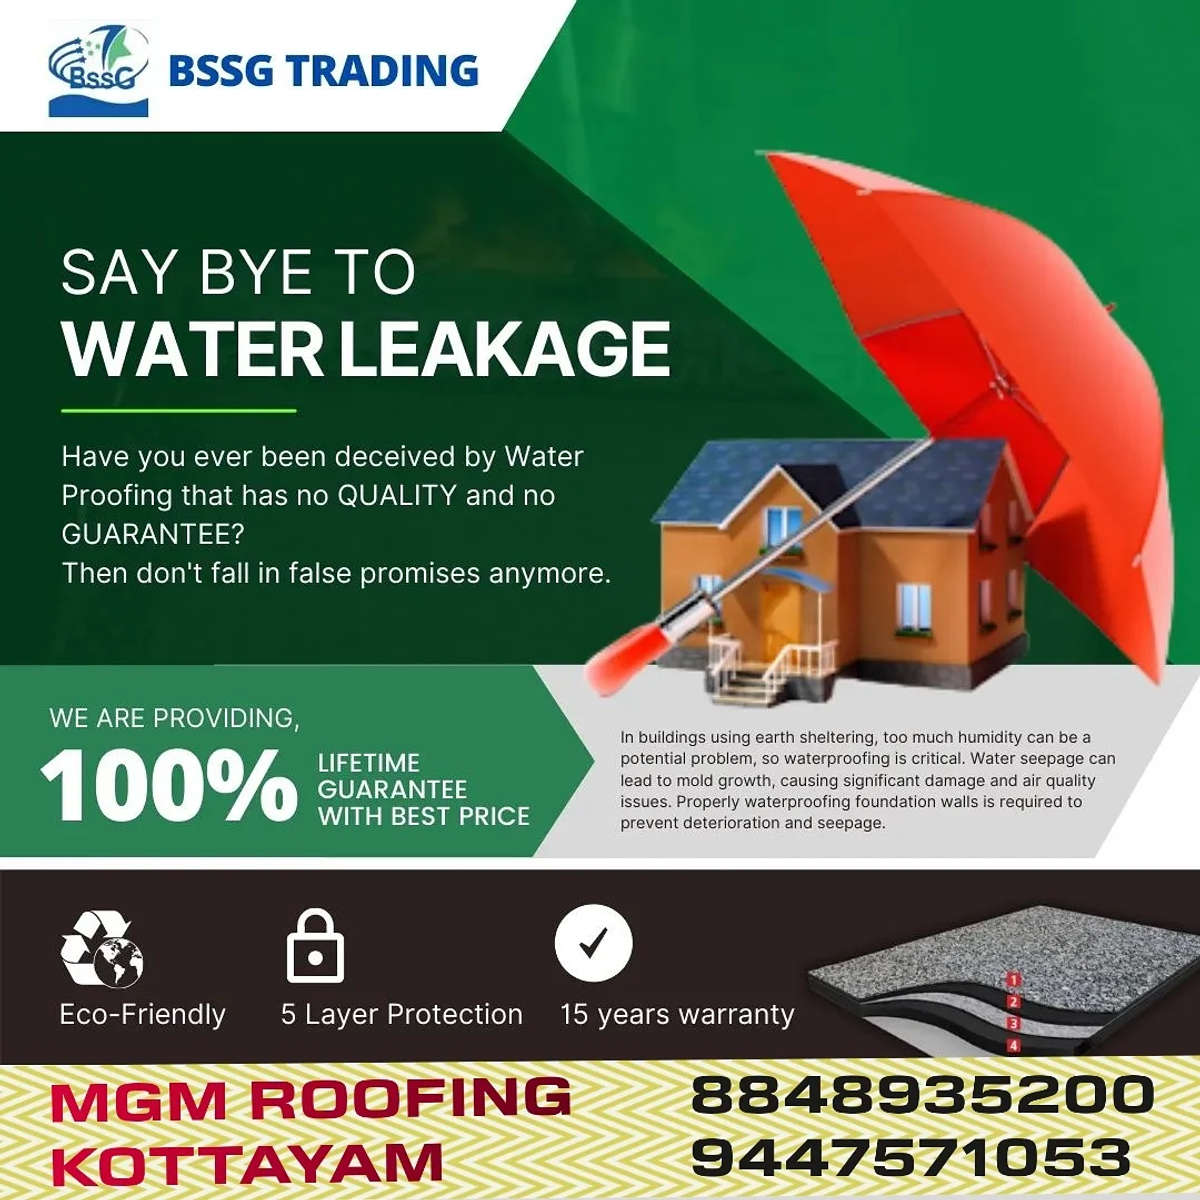 if you need any type of waterproofing services kindly contact us